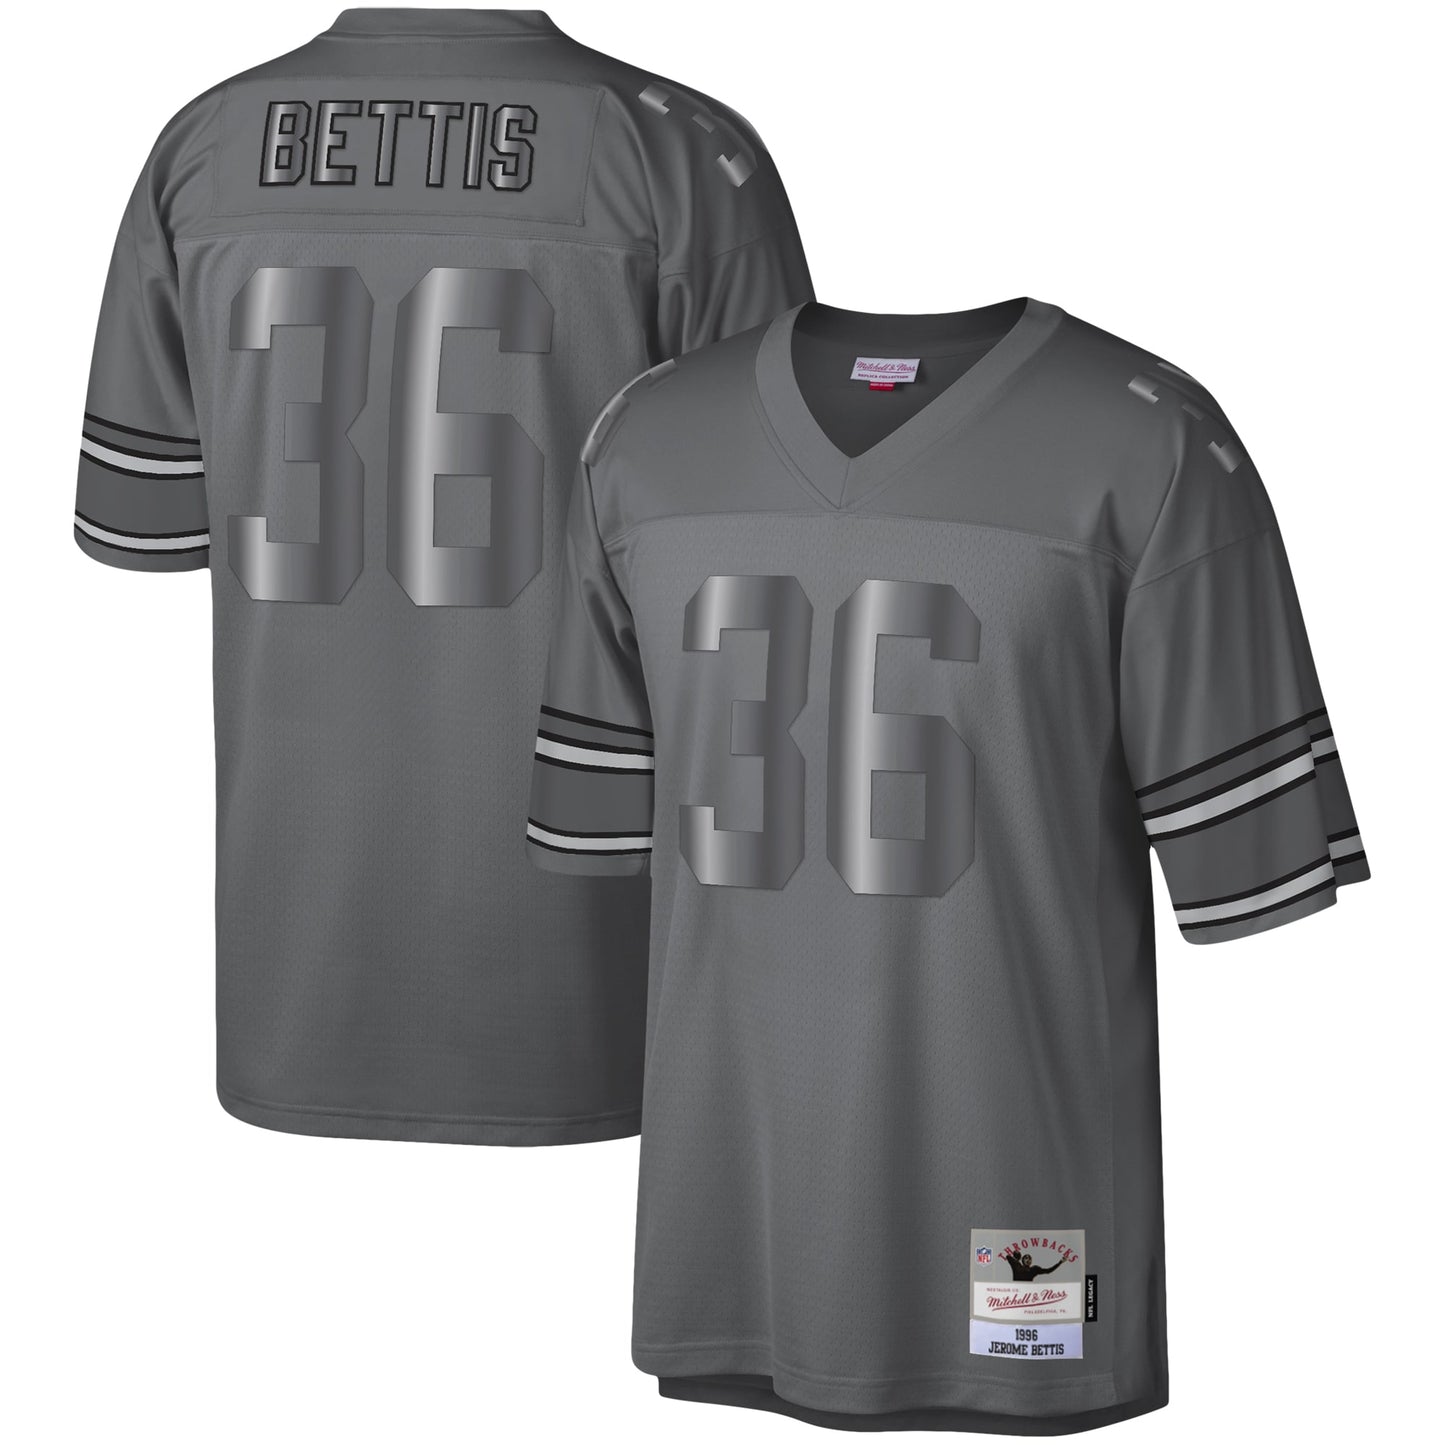 Jerome Bettis Pittsburgh Steelers Mitchell & Ness 1996 Retired Player Metal Legacy Jersey - Charcoal